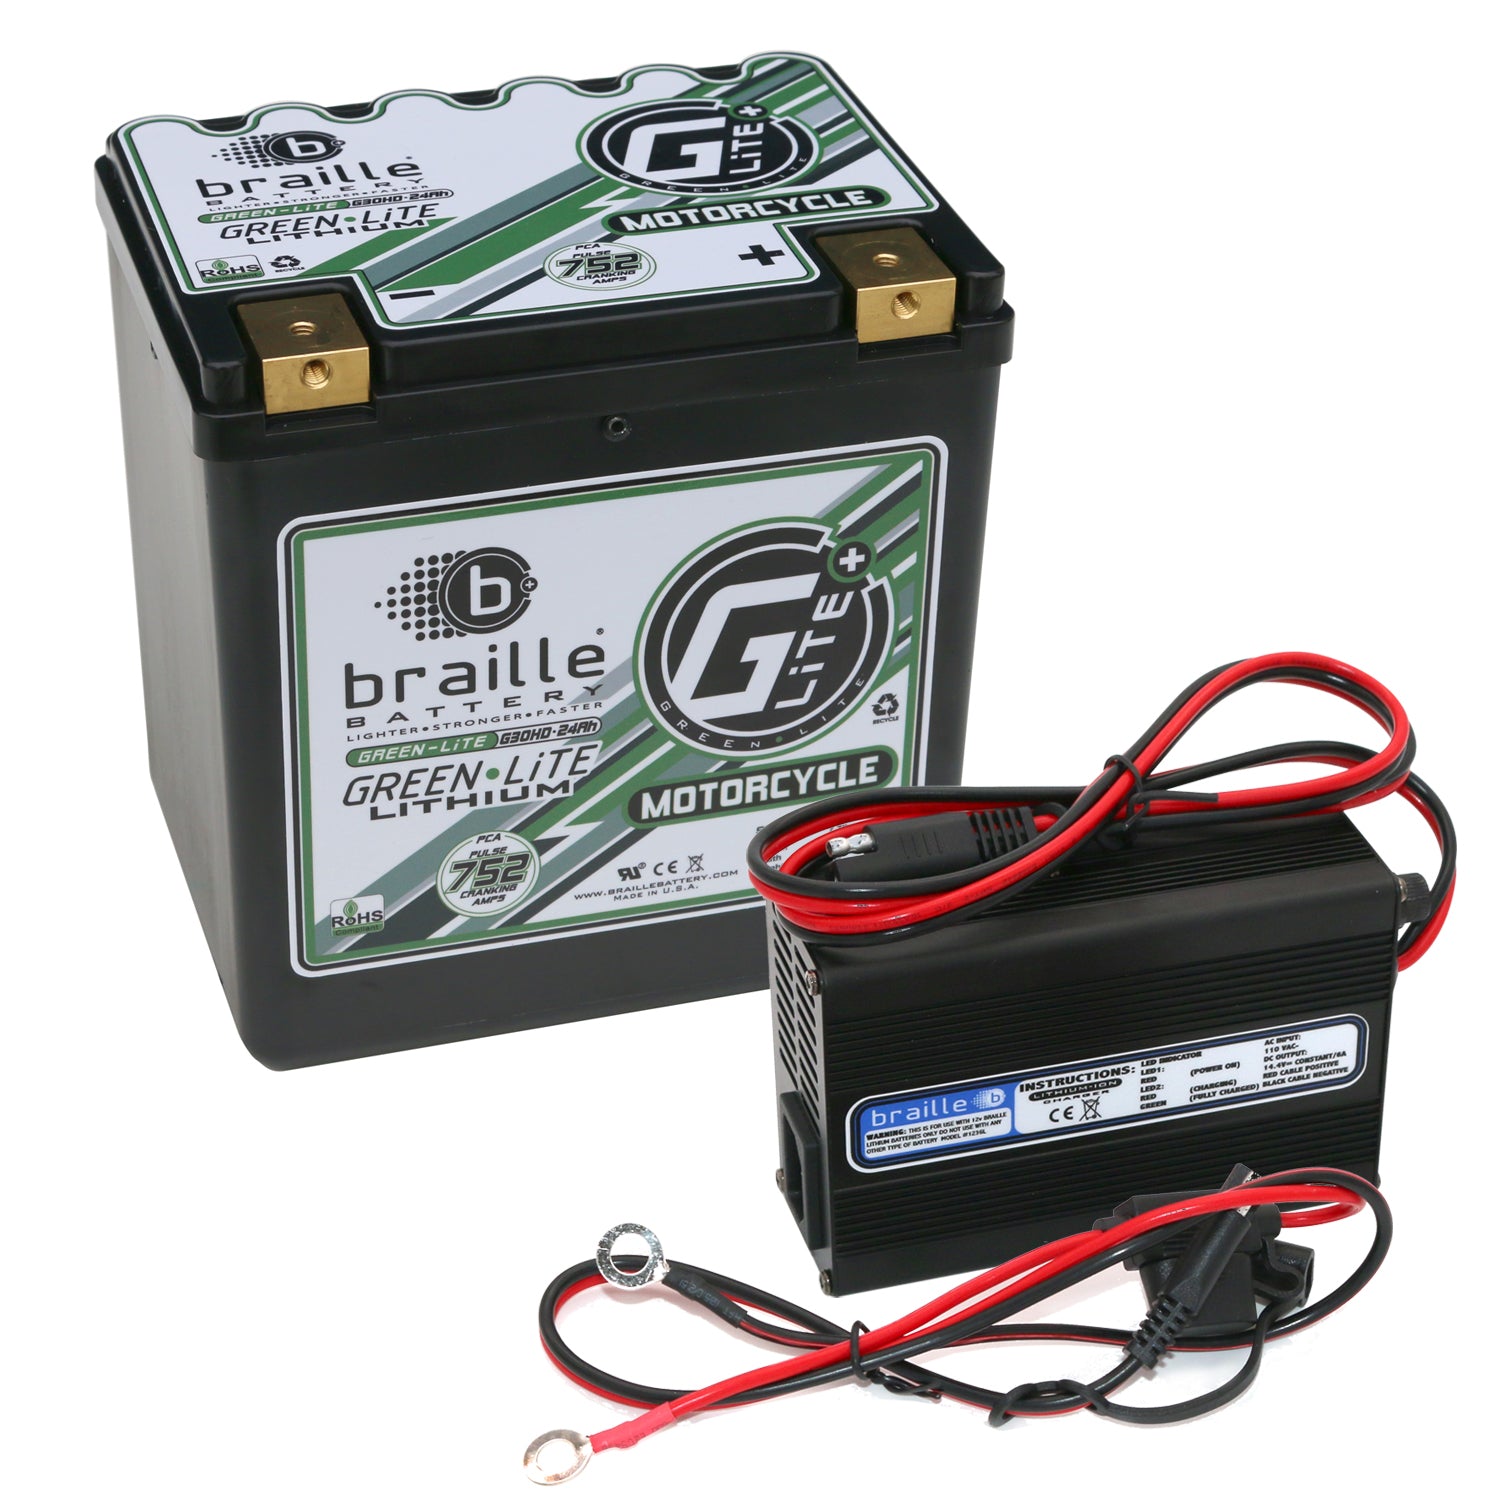 Green-Lite Lithium-Ion 12 V Motorcycle Battery and 6 Amp Charger Combo